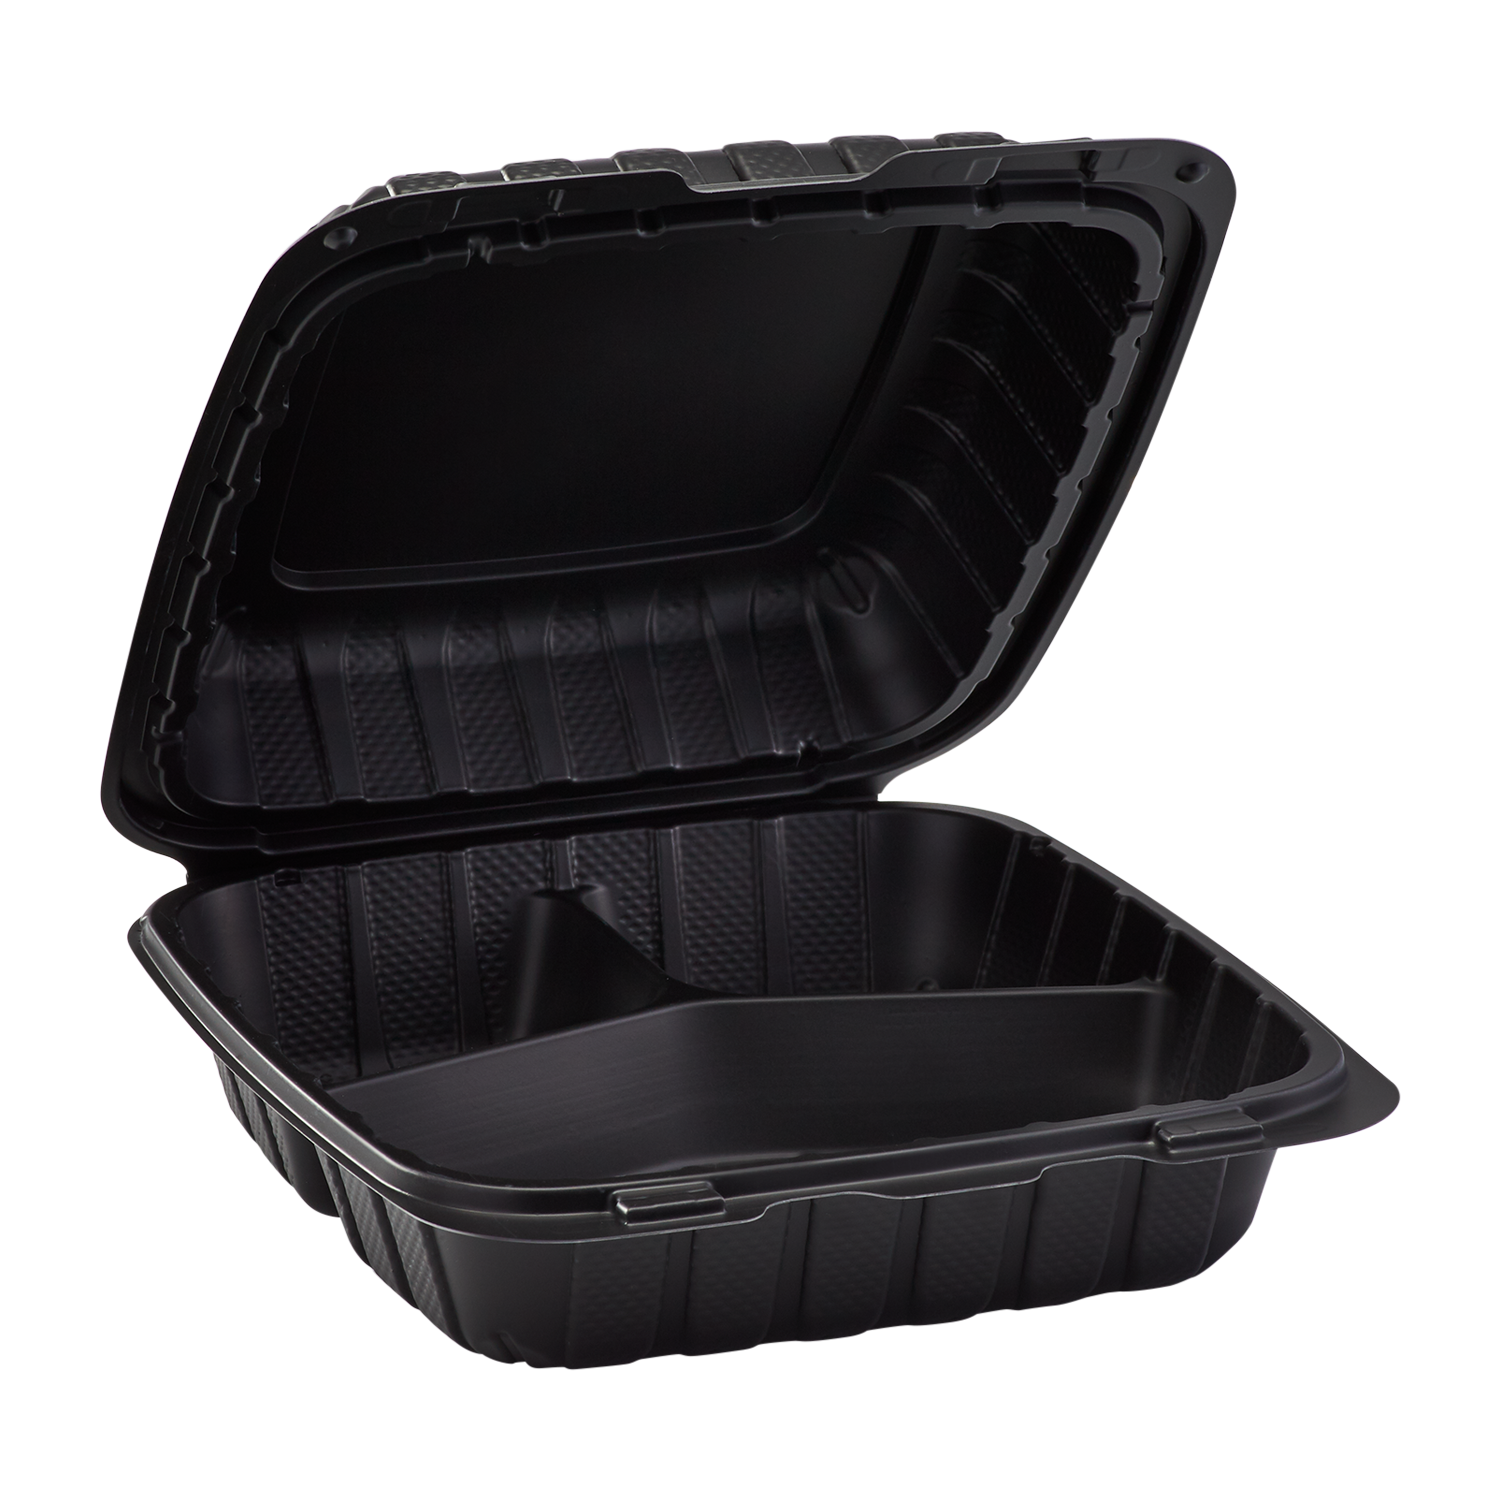 Wholesale Plastic Food Box Plastic Food Container Disposable Lunch Box -  China Lunch Box and Food Box price